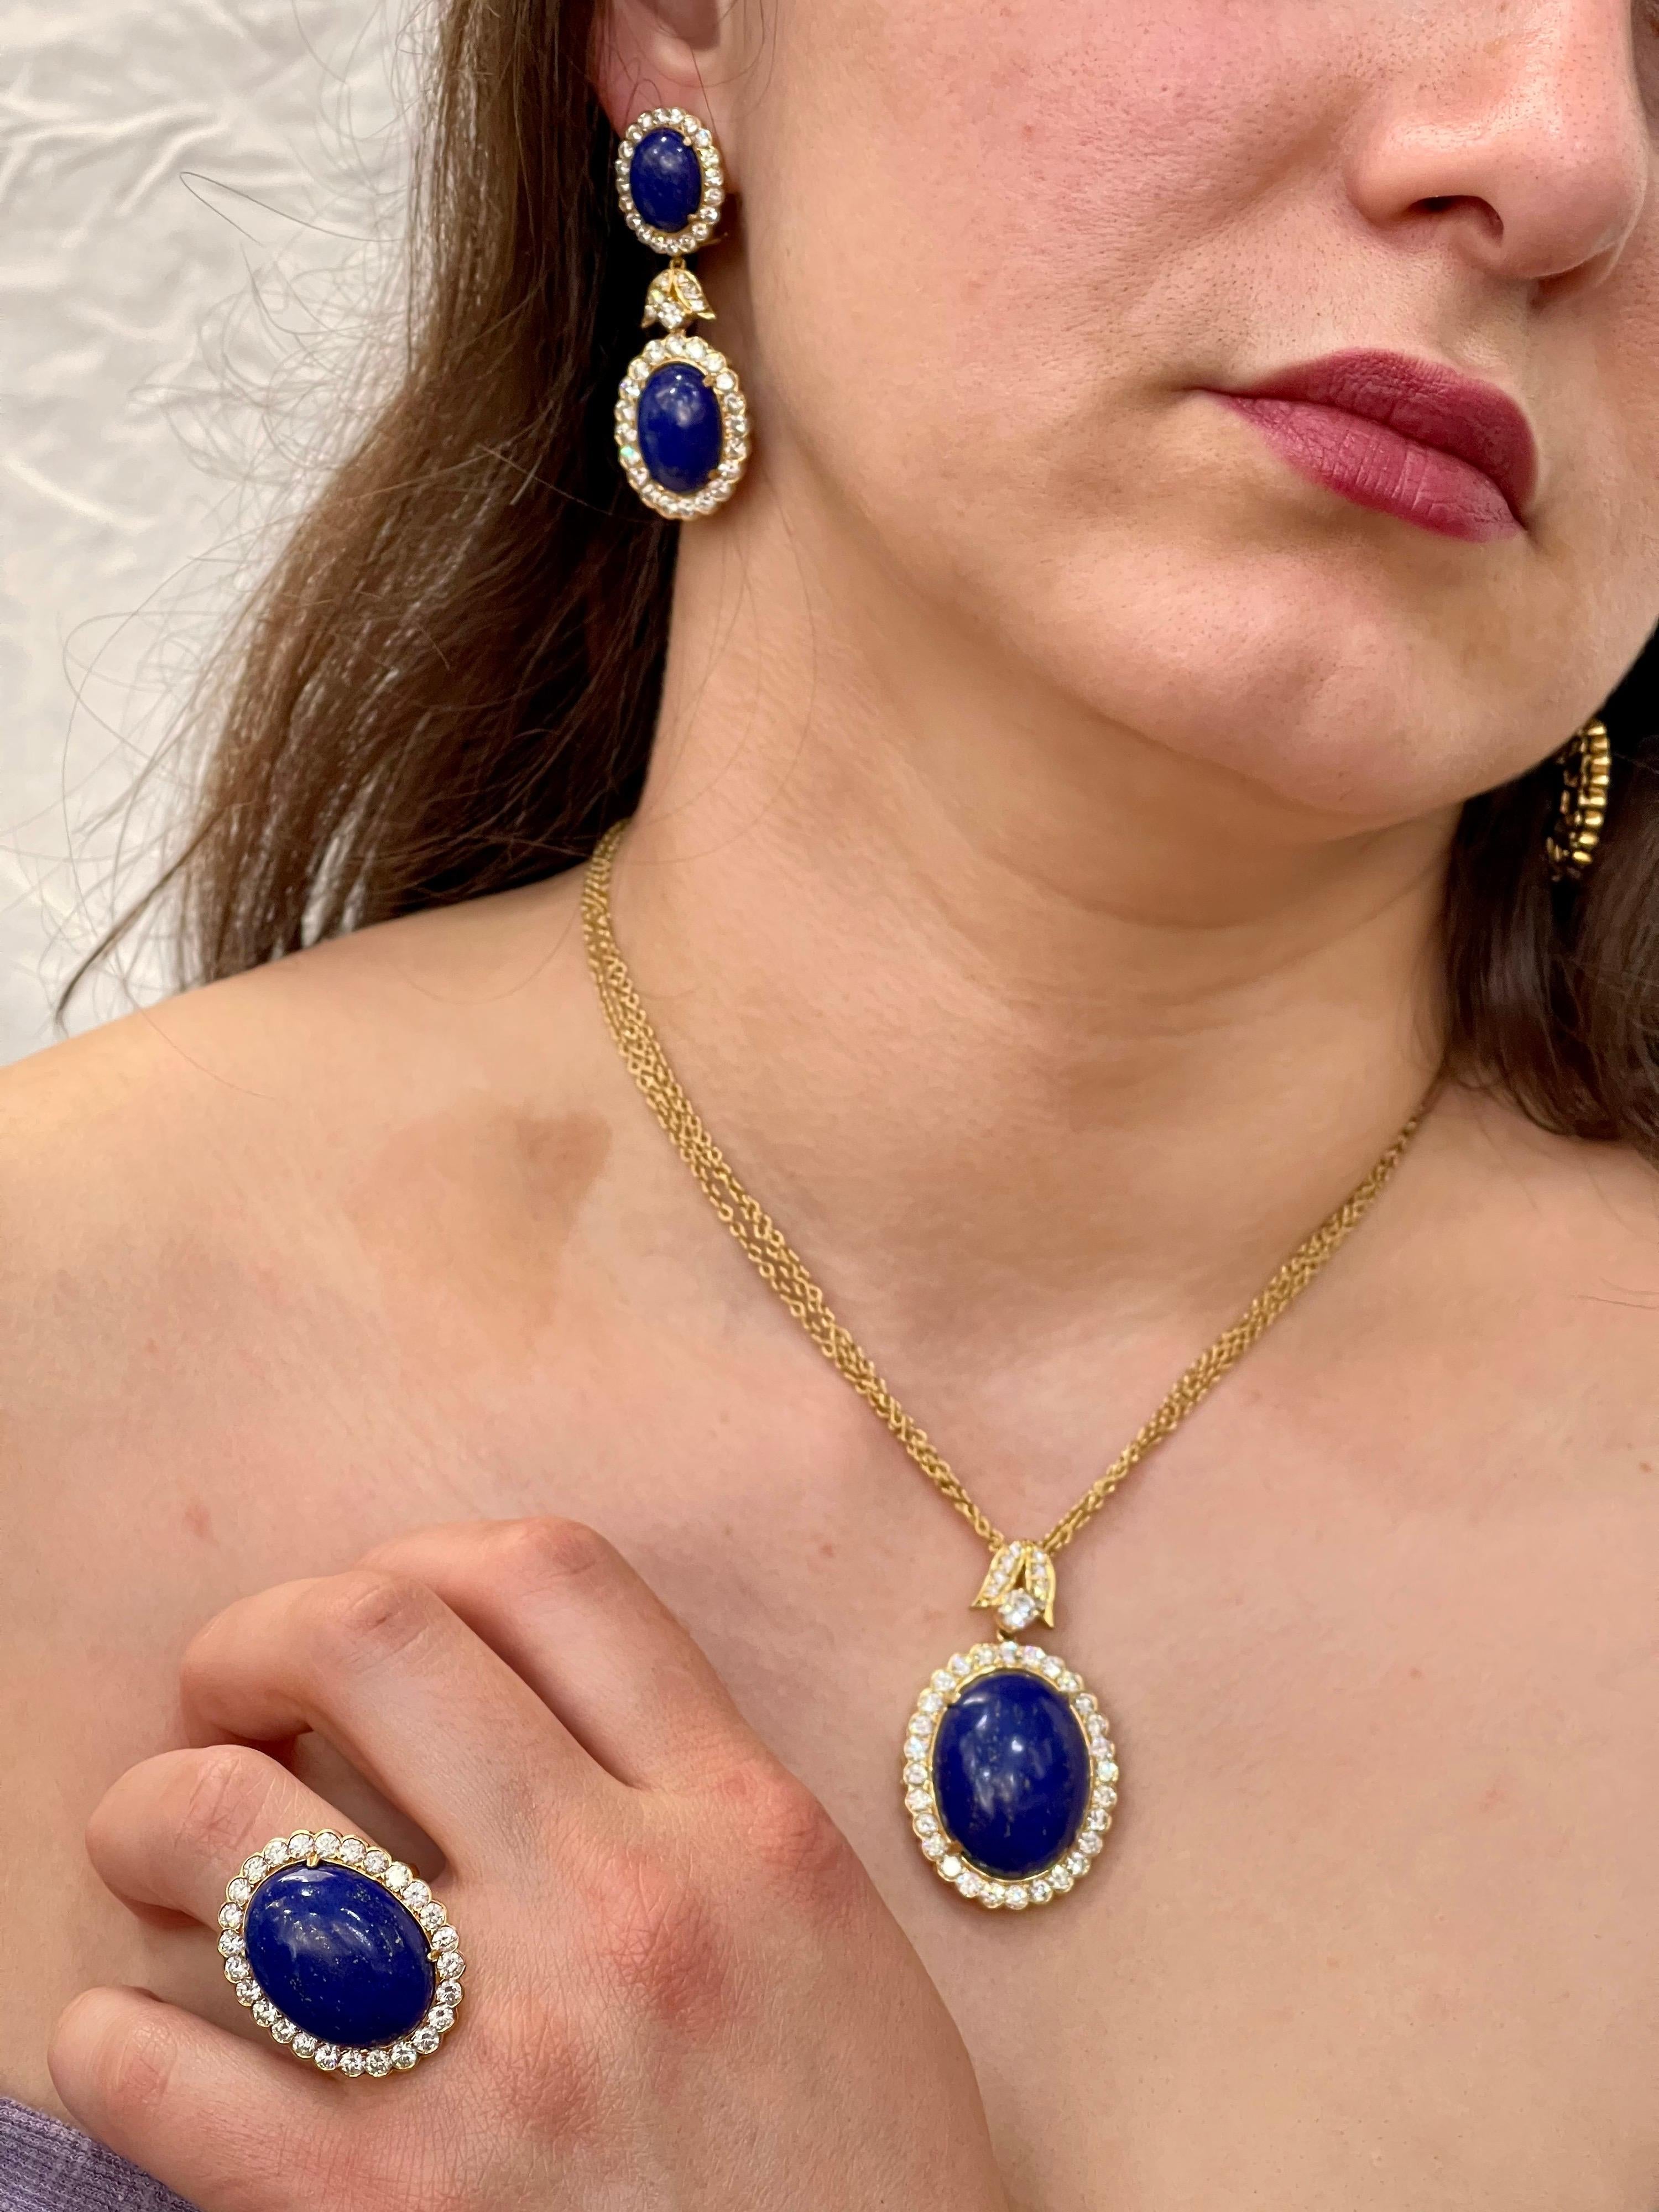 Approximately 15 Ct Diamond & 30+ Ct Natural Lapis Lazuli Set in 18 Karat  Yellow  Gold. Set Includes a Ring, a Earring, and a Pendant with three layer chain .
Made in Italy.
Ring size 5.5
This spectacular set consisting of  Natural Lapis Lazuli 